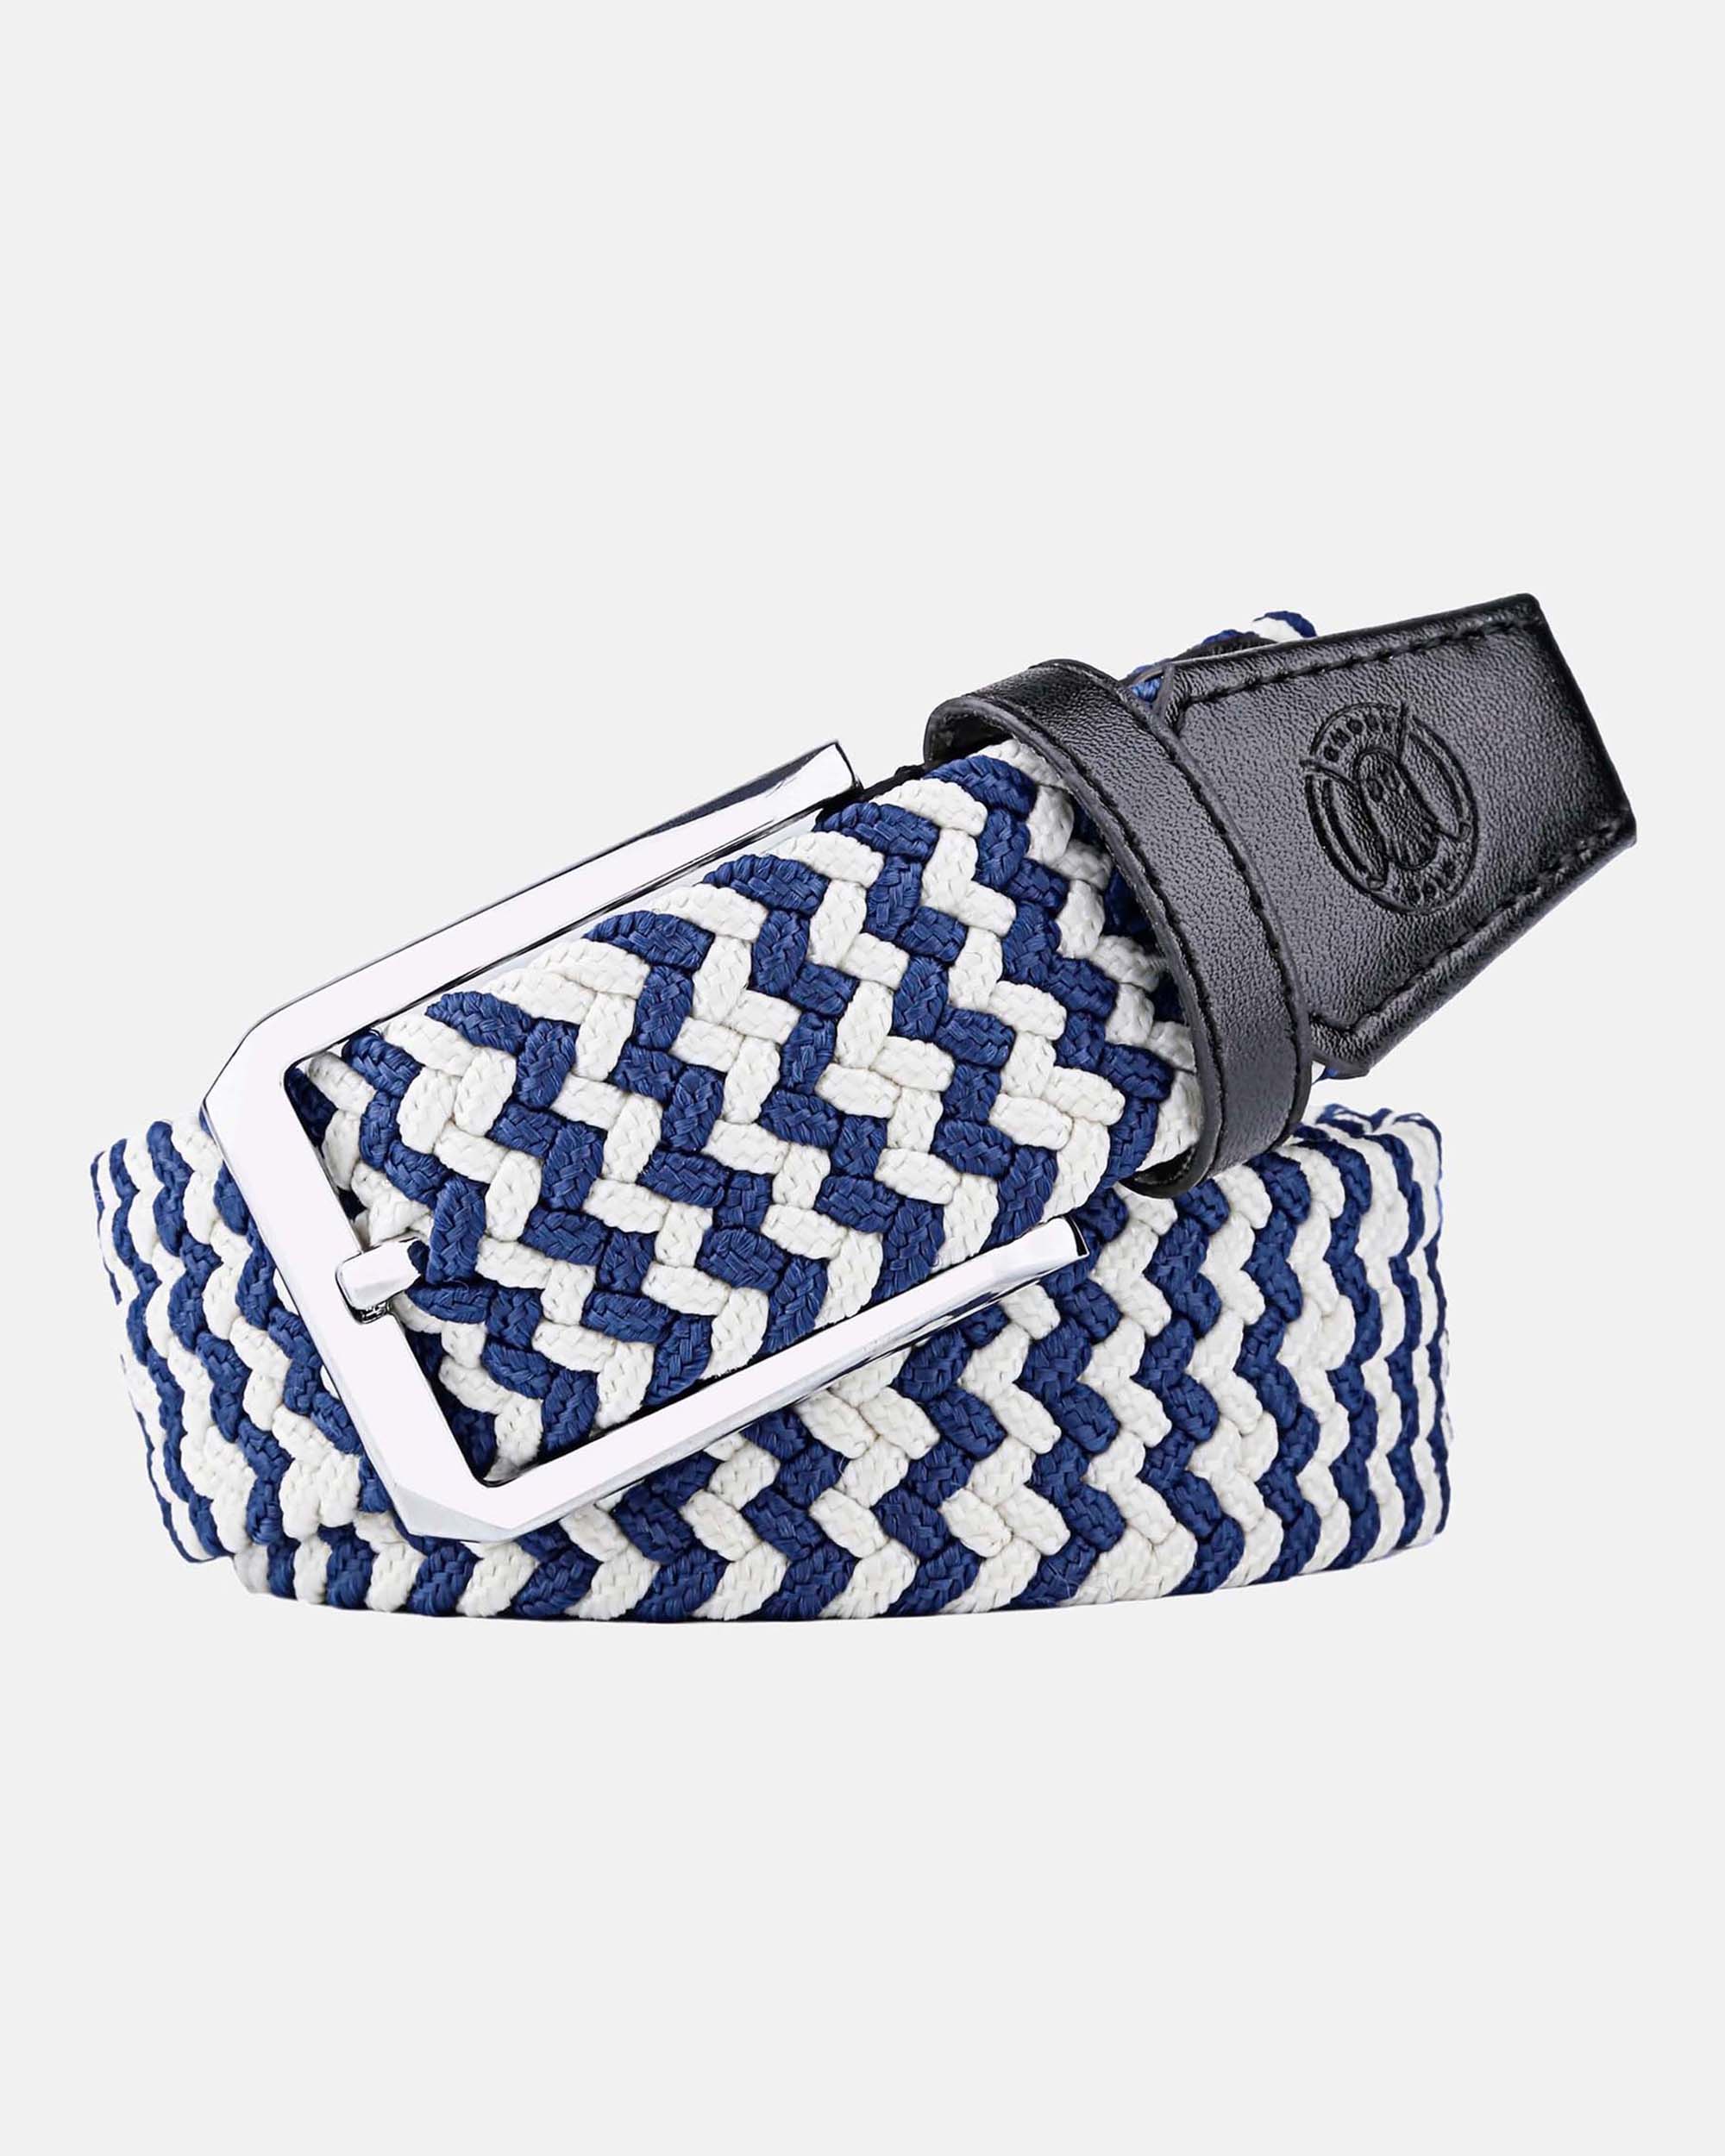 Maxwell Braided Leather Belt - Leather - Belts